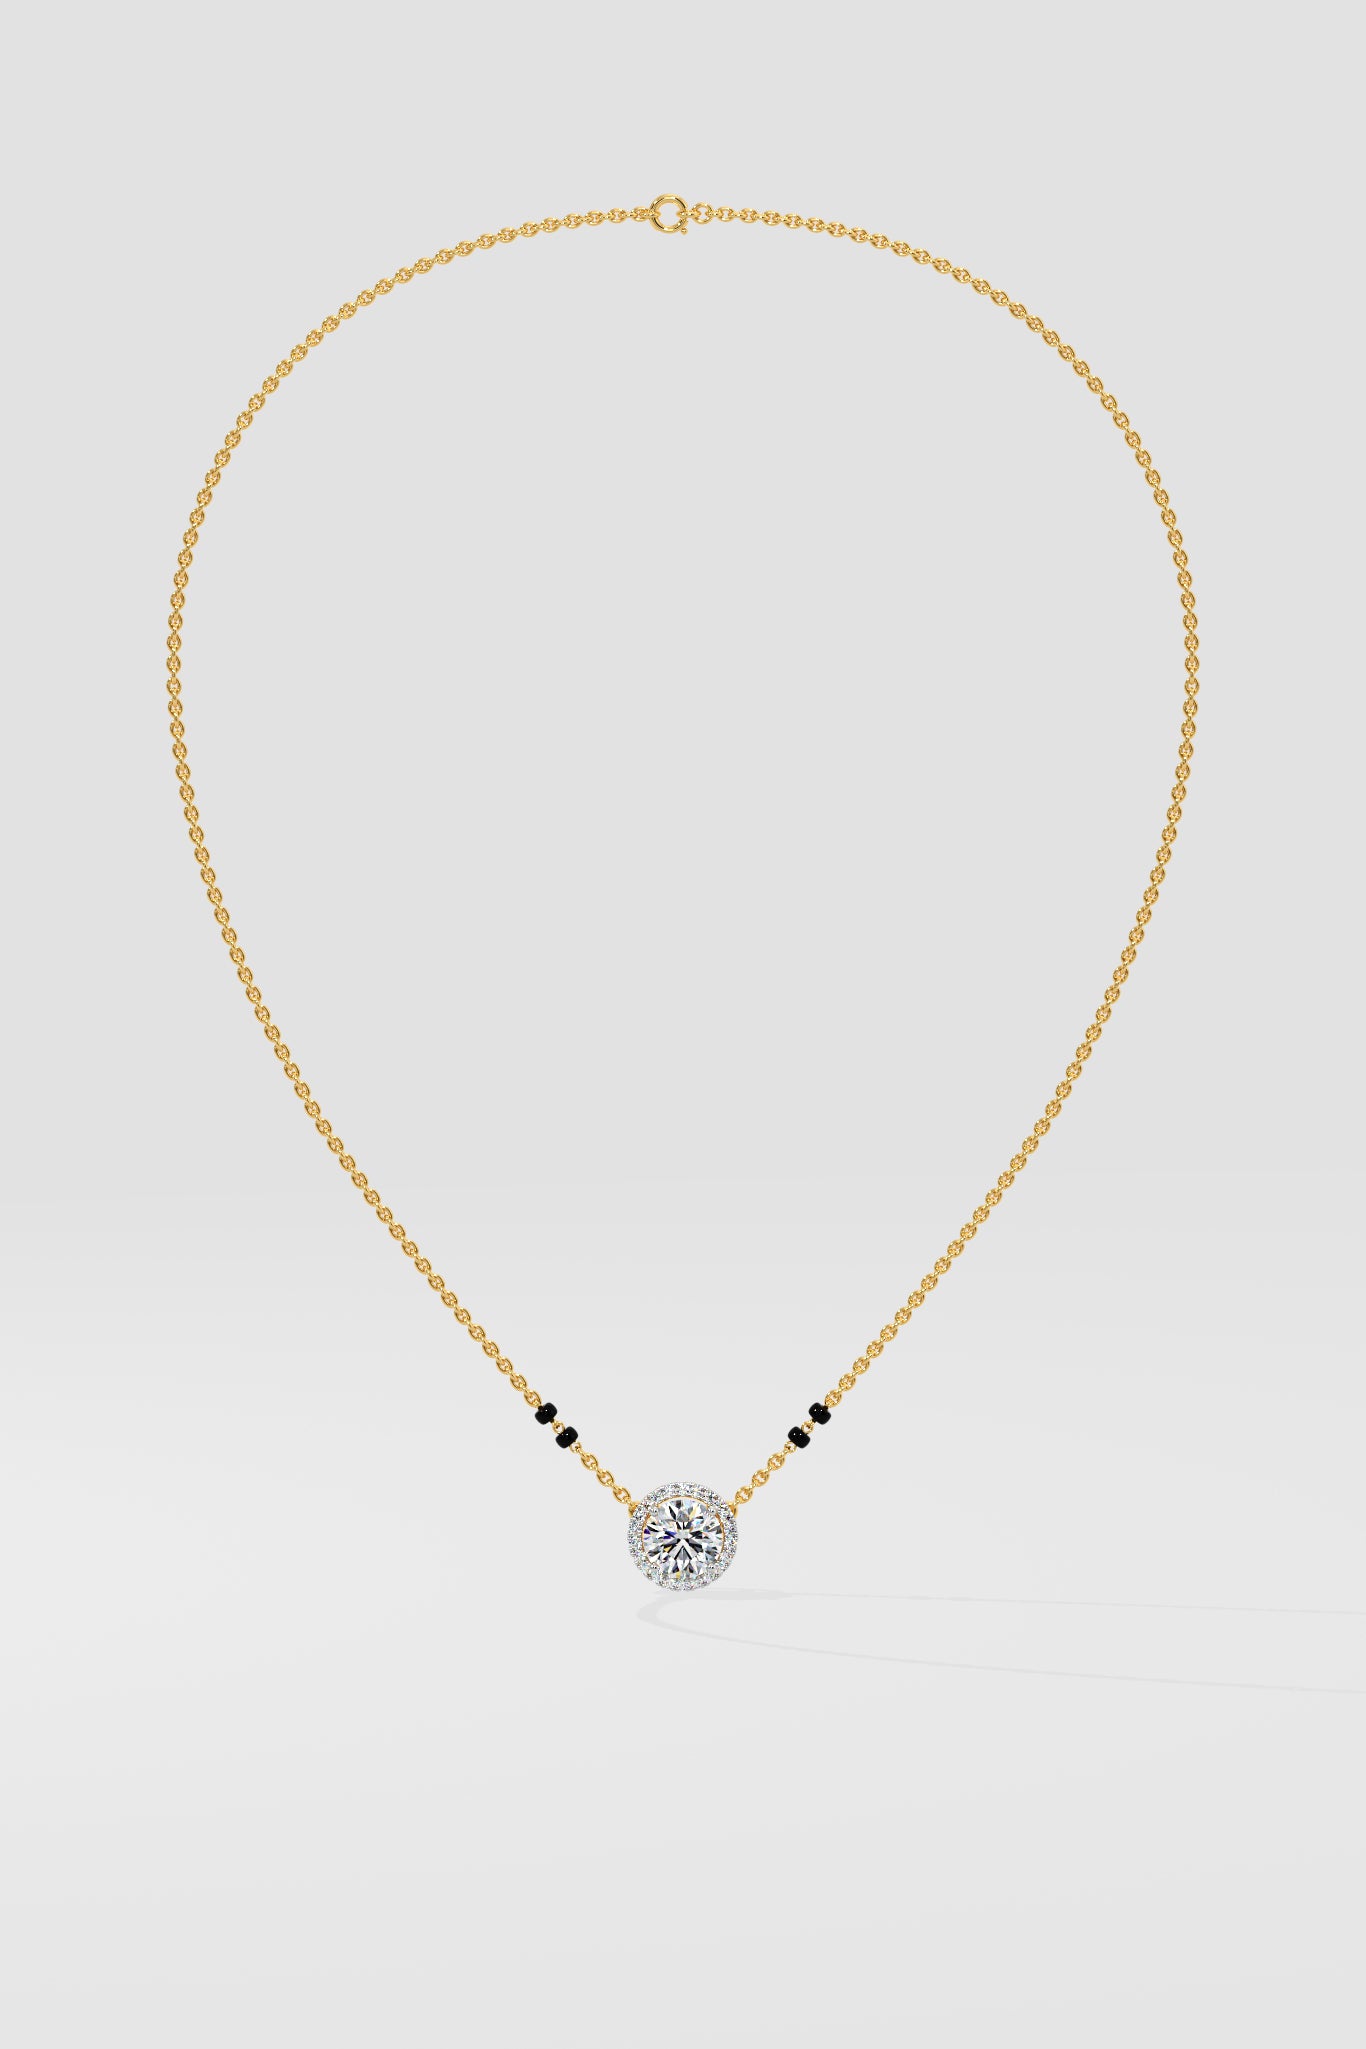 1 ct Solitaire Halo Mangalsutra